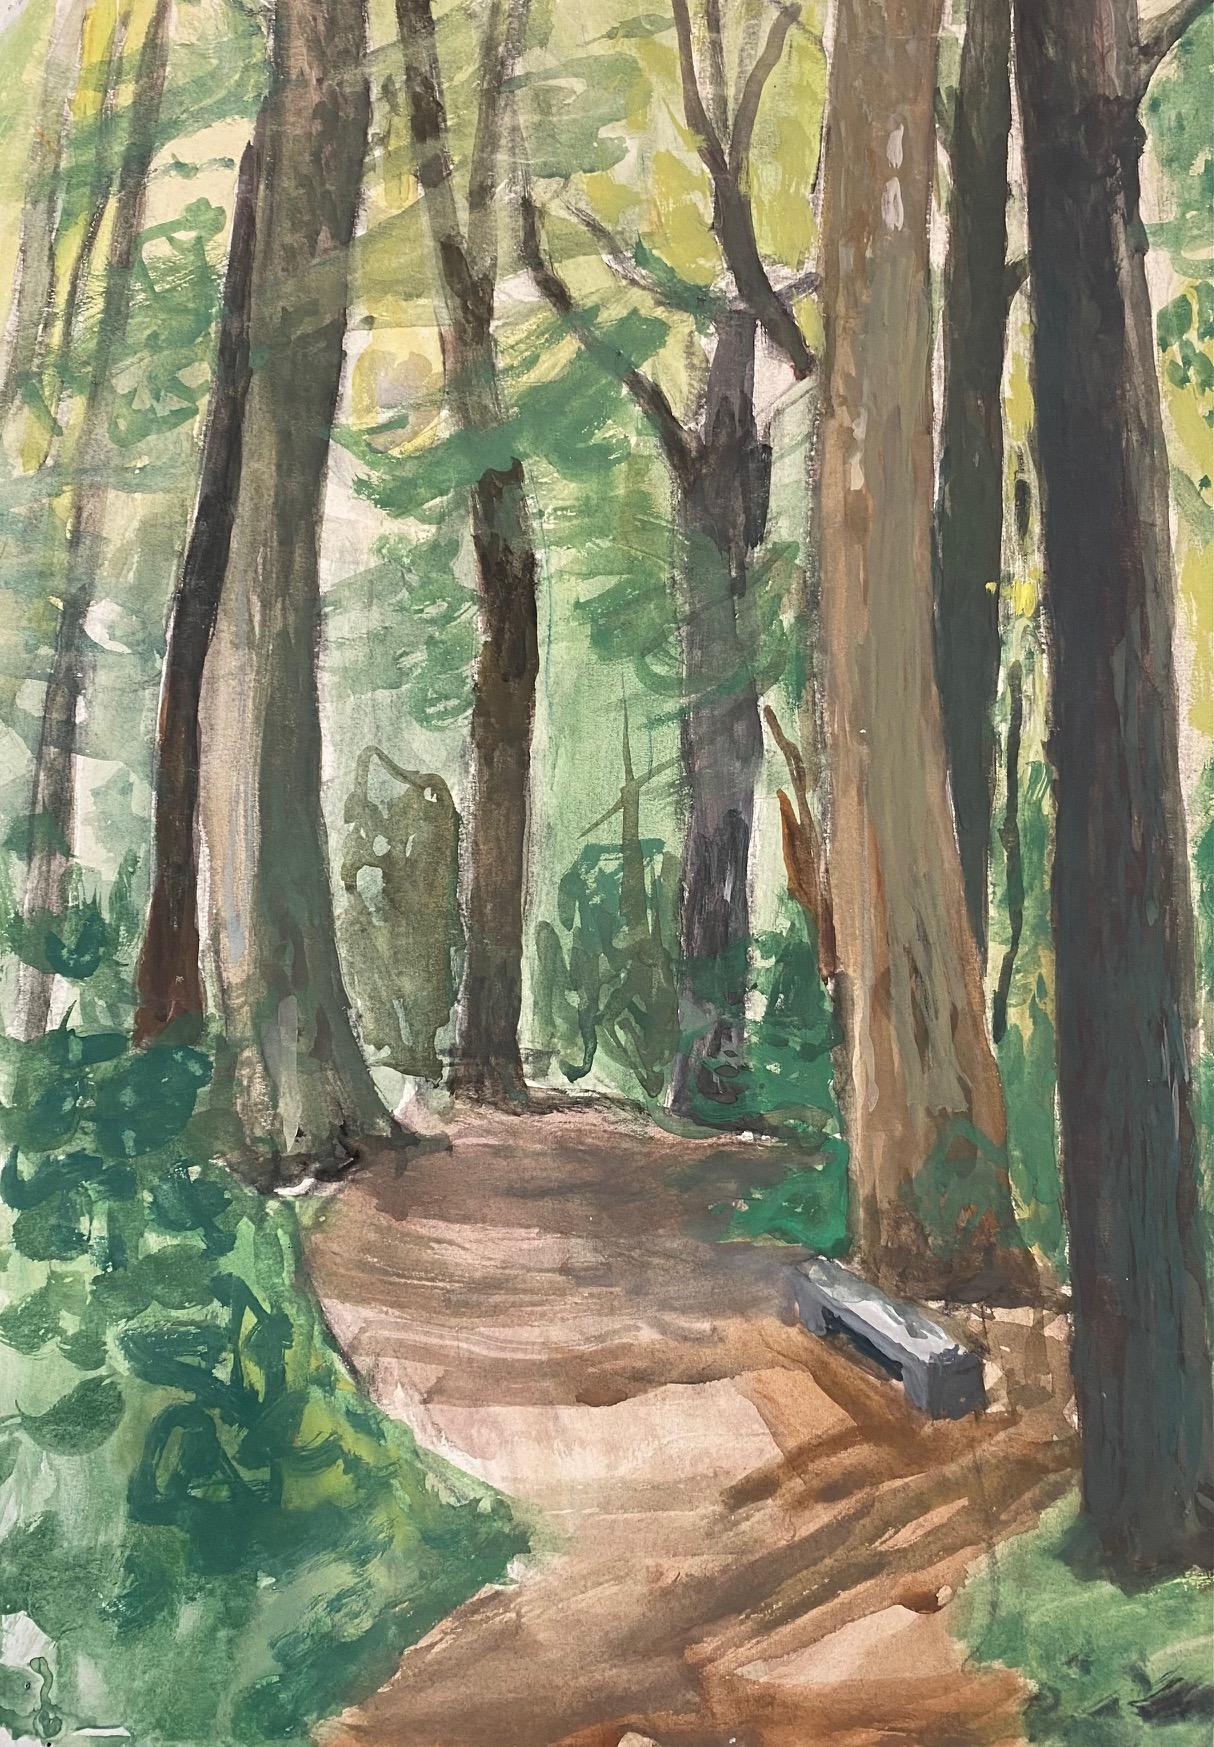 Isaac Charles Goetz Landscape Art - Stone bench under the woods by Charles Goetz - Watercolor 42x30 cm